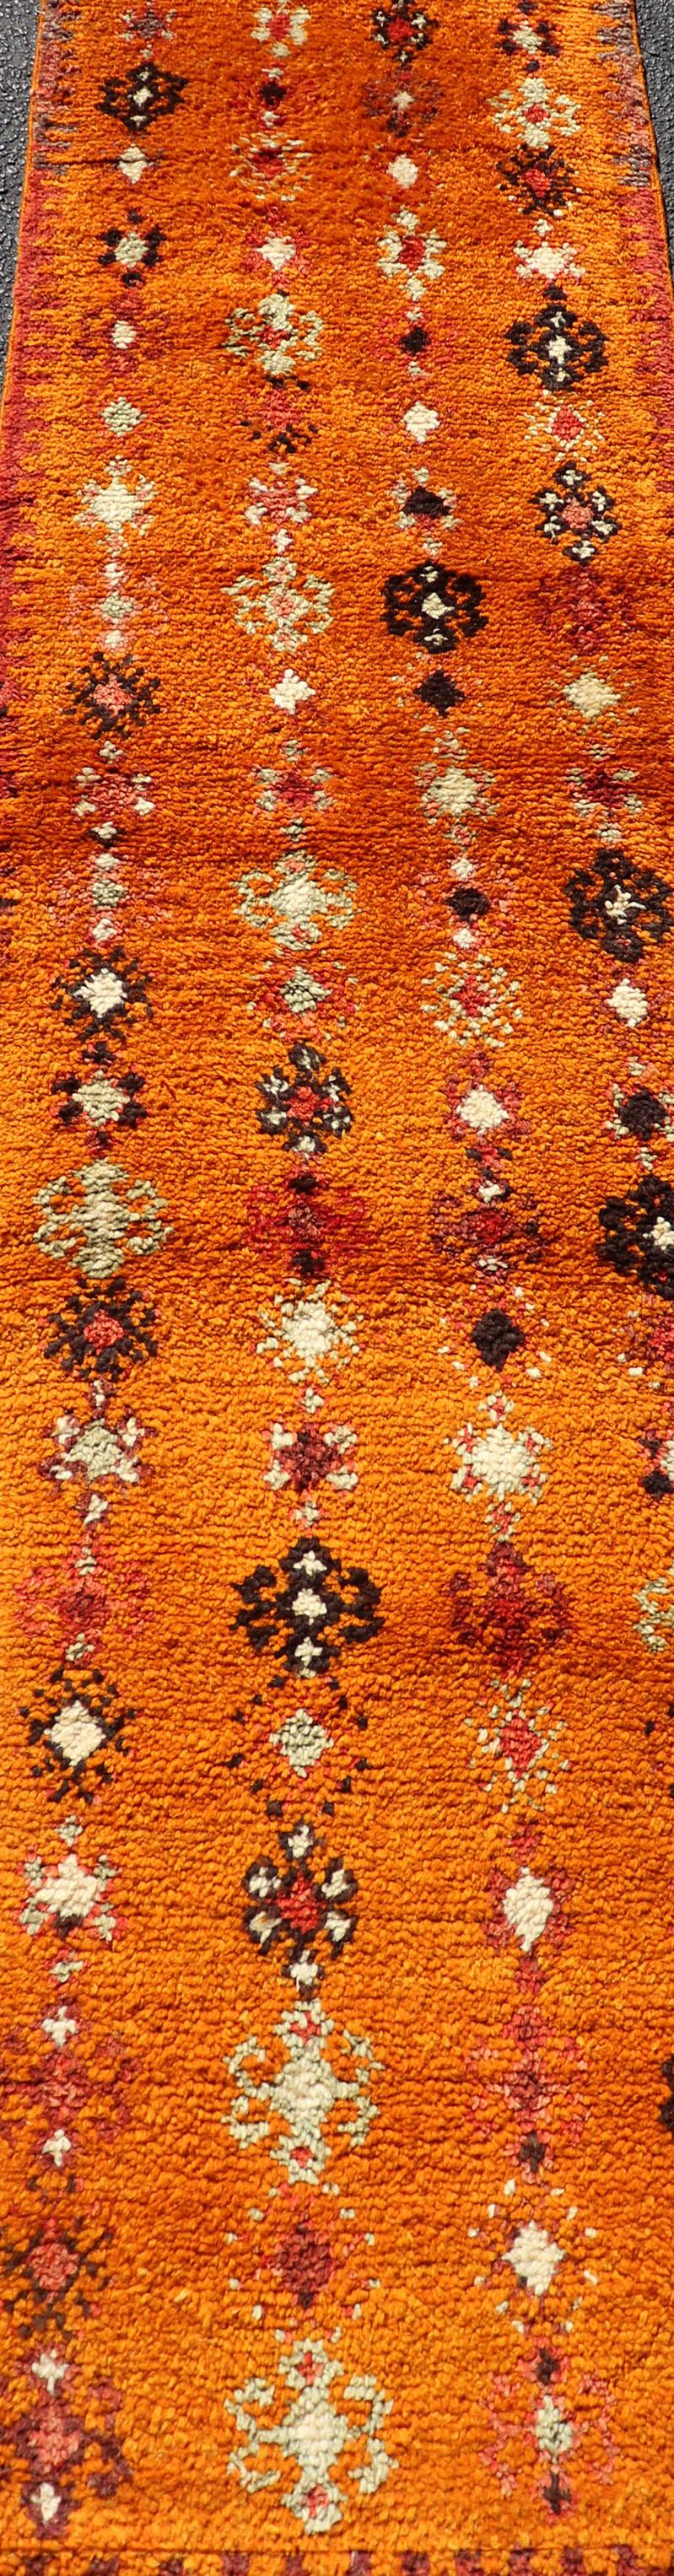 Wool Vintage Moroccan Runner with Sub-Geometric Motifs in Saffron, Gold and Orange